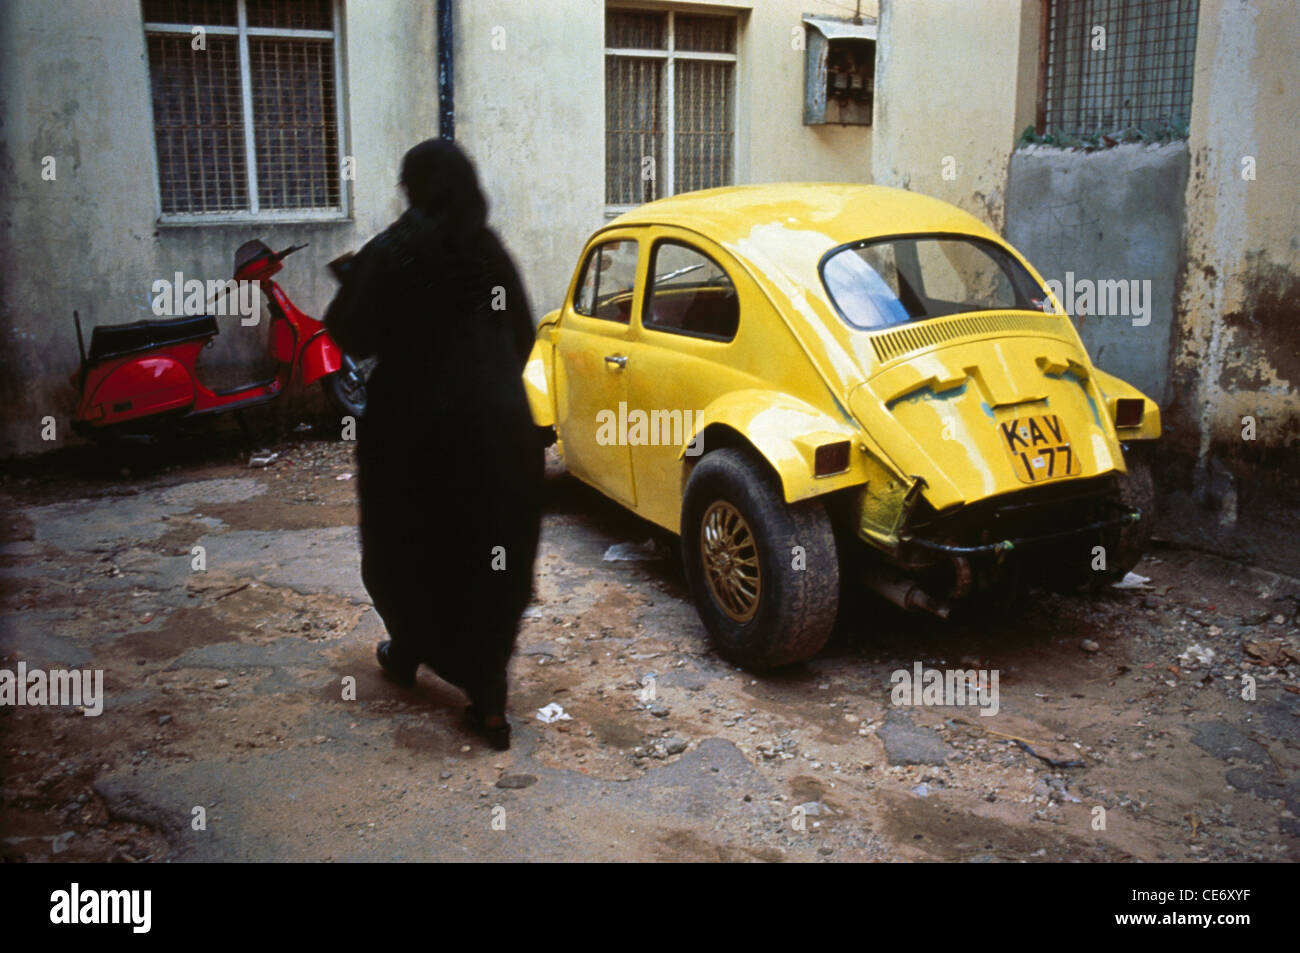 red scooter yellow vw volkswagen beetle vehicle parked car and women black burqa dress Mombasa Kenya Africa Stock Photo